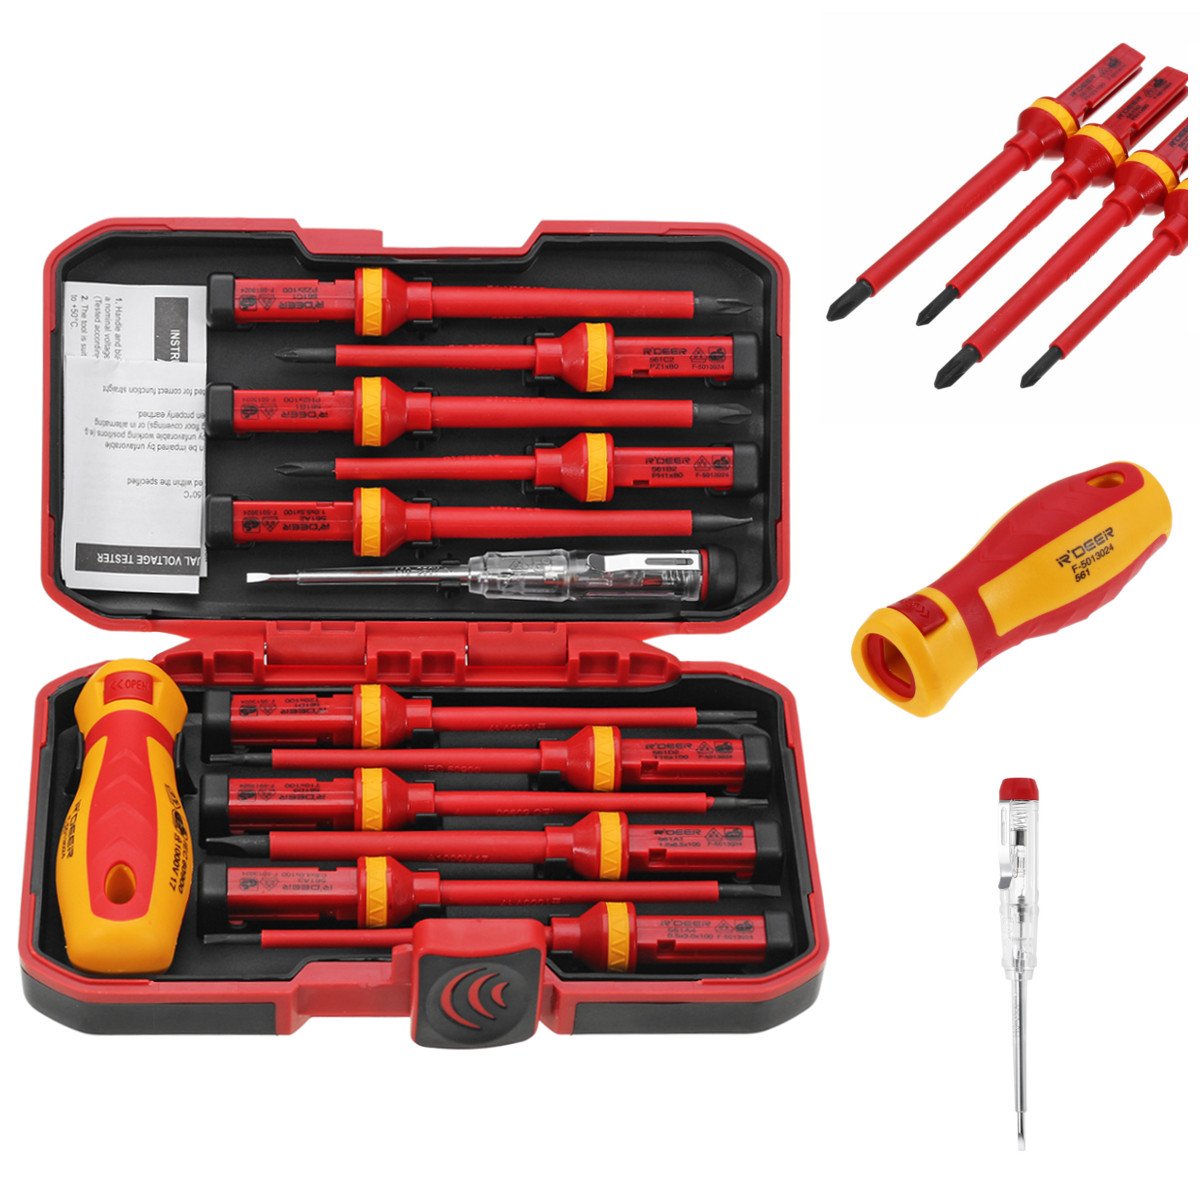 13Pcs 1000V Electronic Insulated Screwdriver Set Phillips Slotted Torx CR-V Screwdriver Repair Tools 1